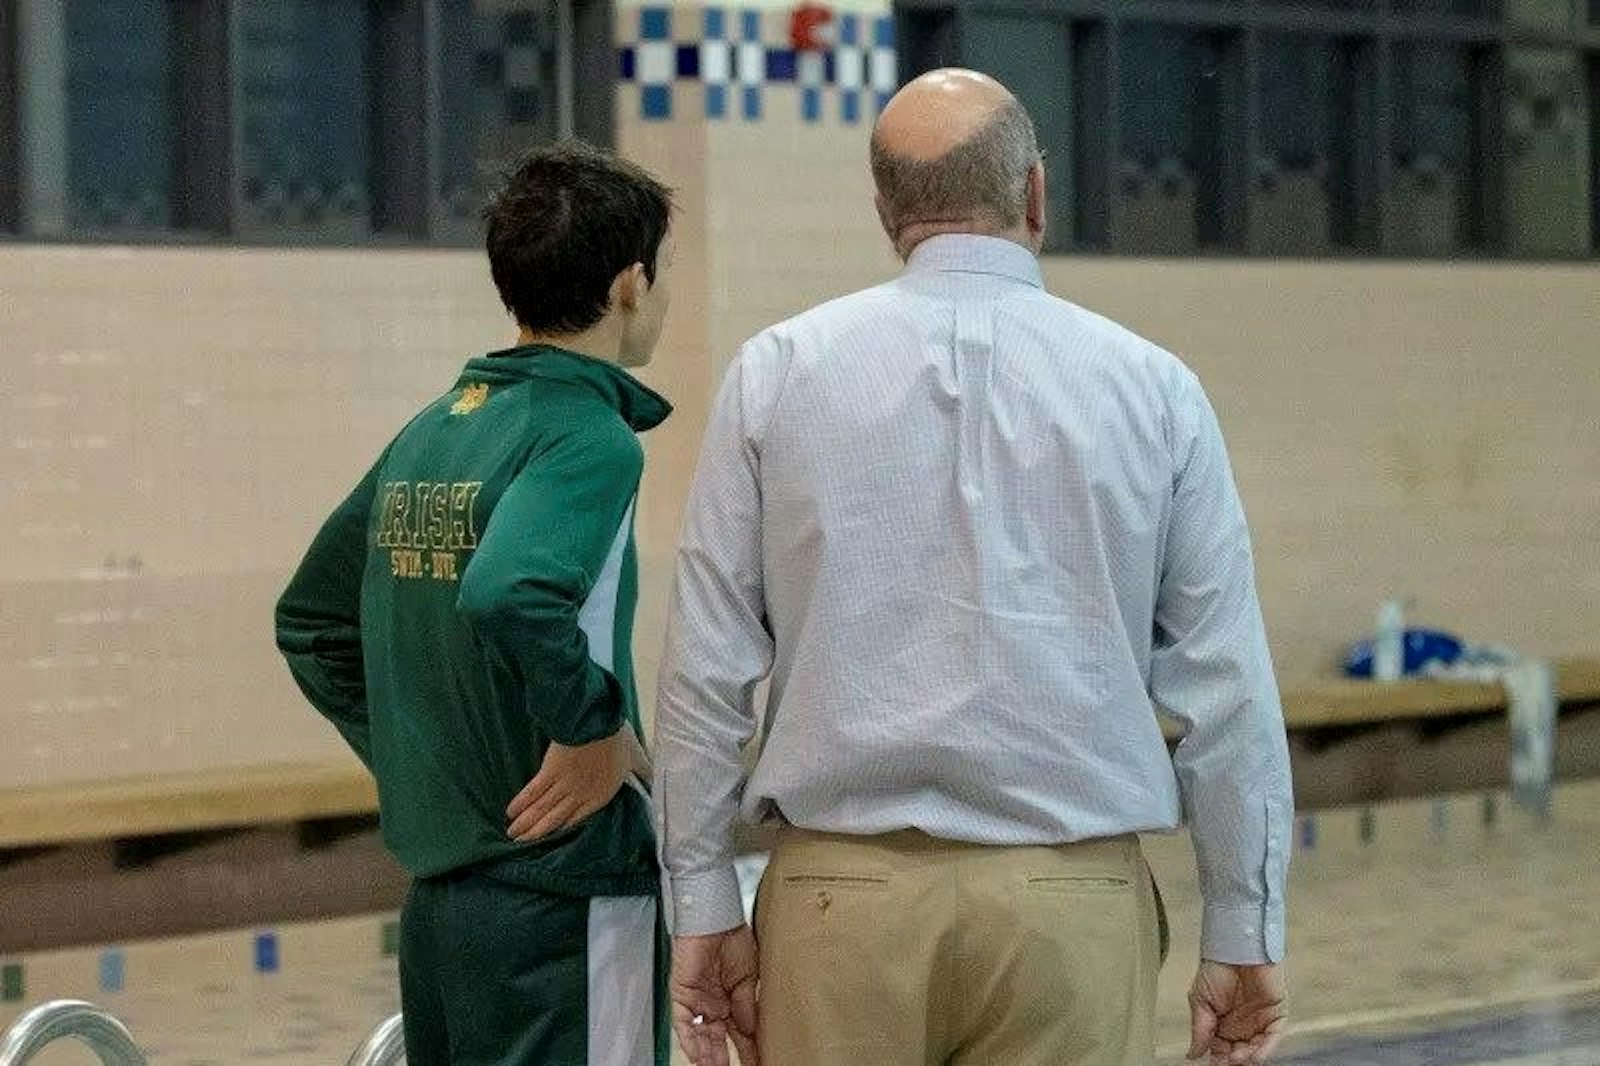 Mark McGreevy, middle school religion teacher, is a longtime swim coach at Notre Dame Prep. He says his swimmers pray as a team at the end of each practice. "I give ownership of that to the teams, meaning they do it on their own without coach prompting," he said.